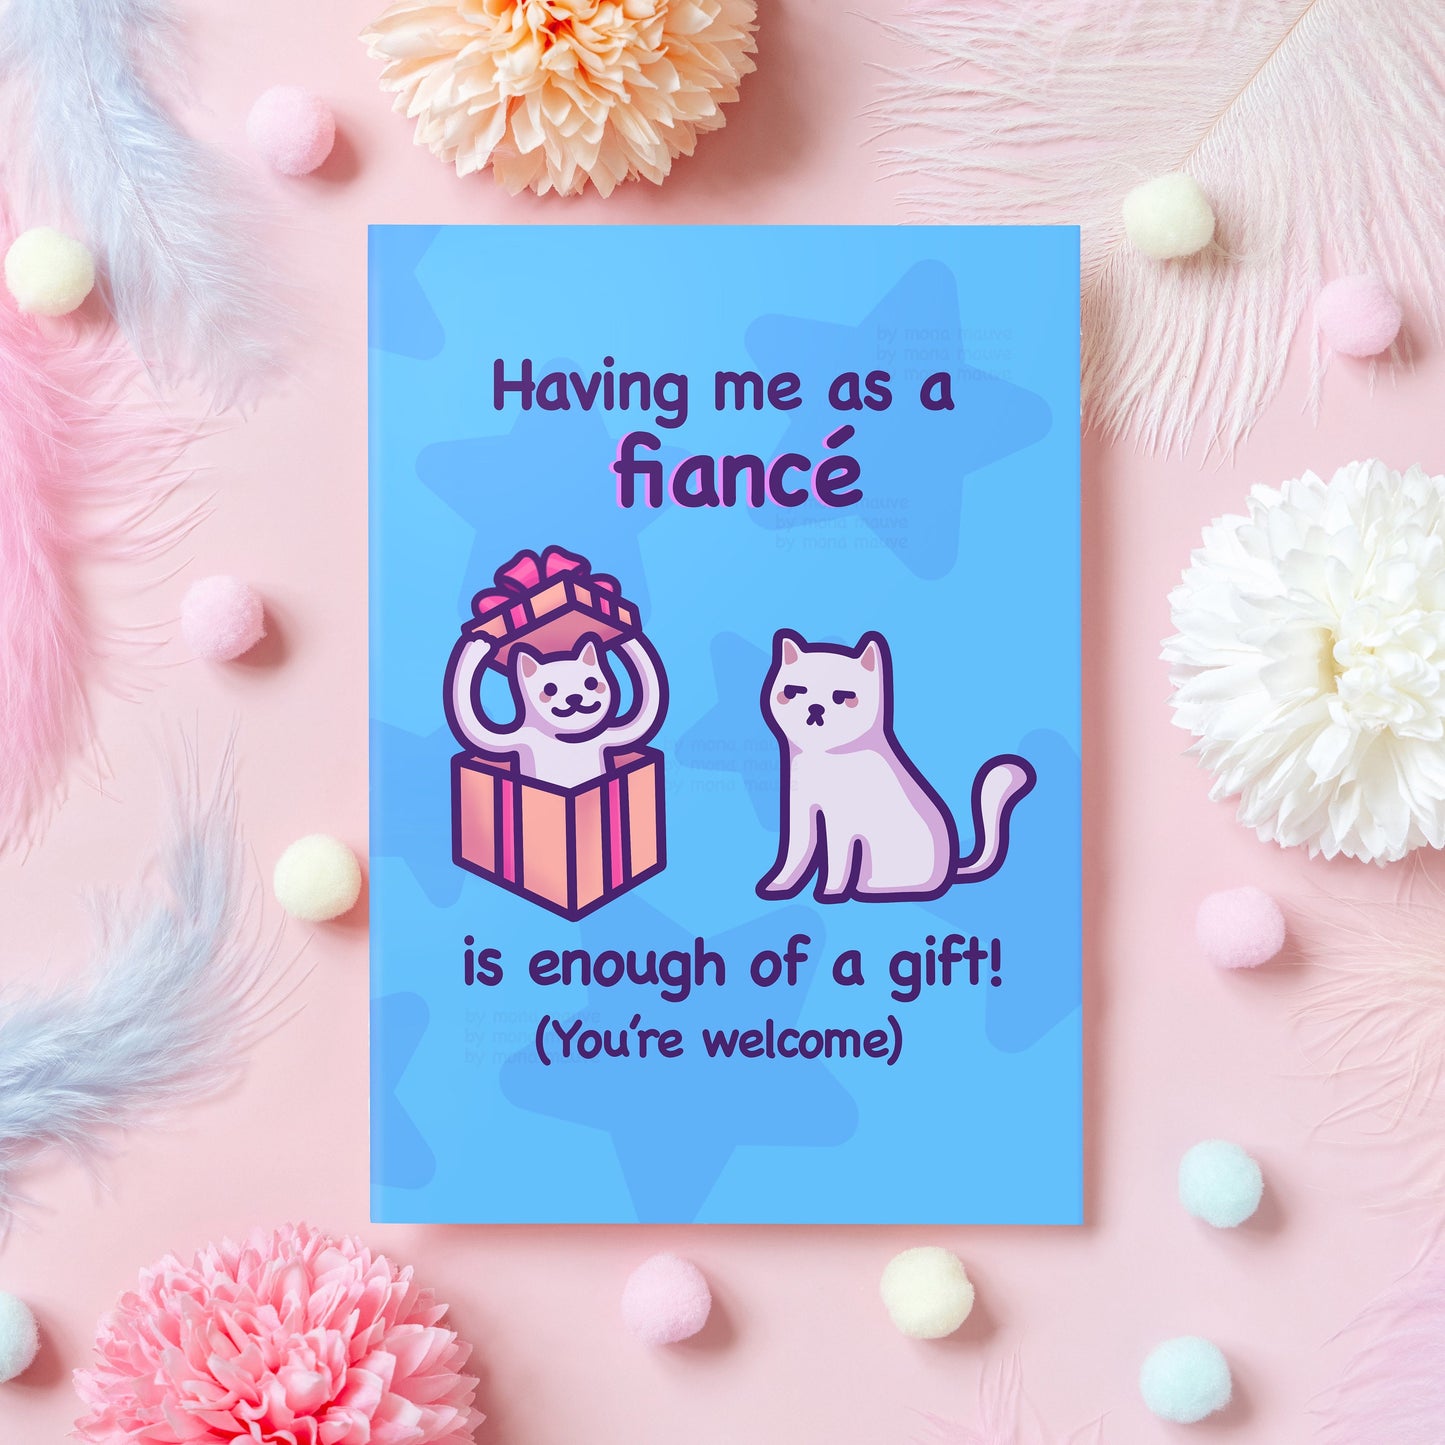 Funny Fiancée Birthday Card | Having Me as a Fiancé Is Enough of a Gift! | Cute Cat Card for Birthday | Gift for Fiancé or Fiancée